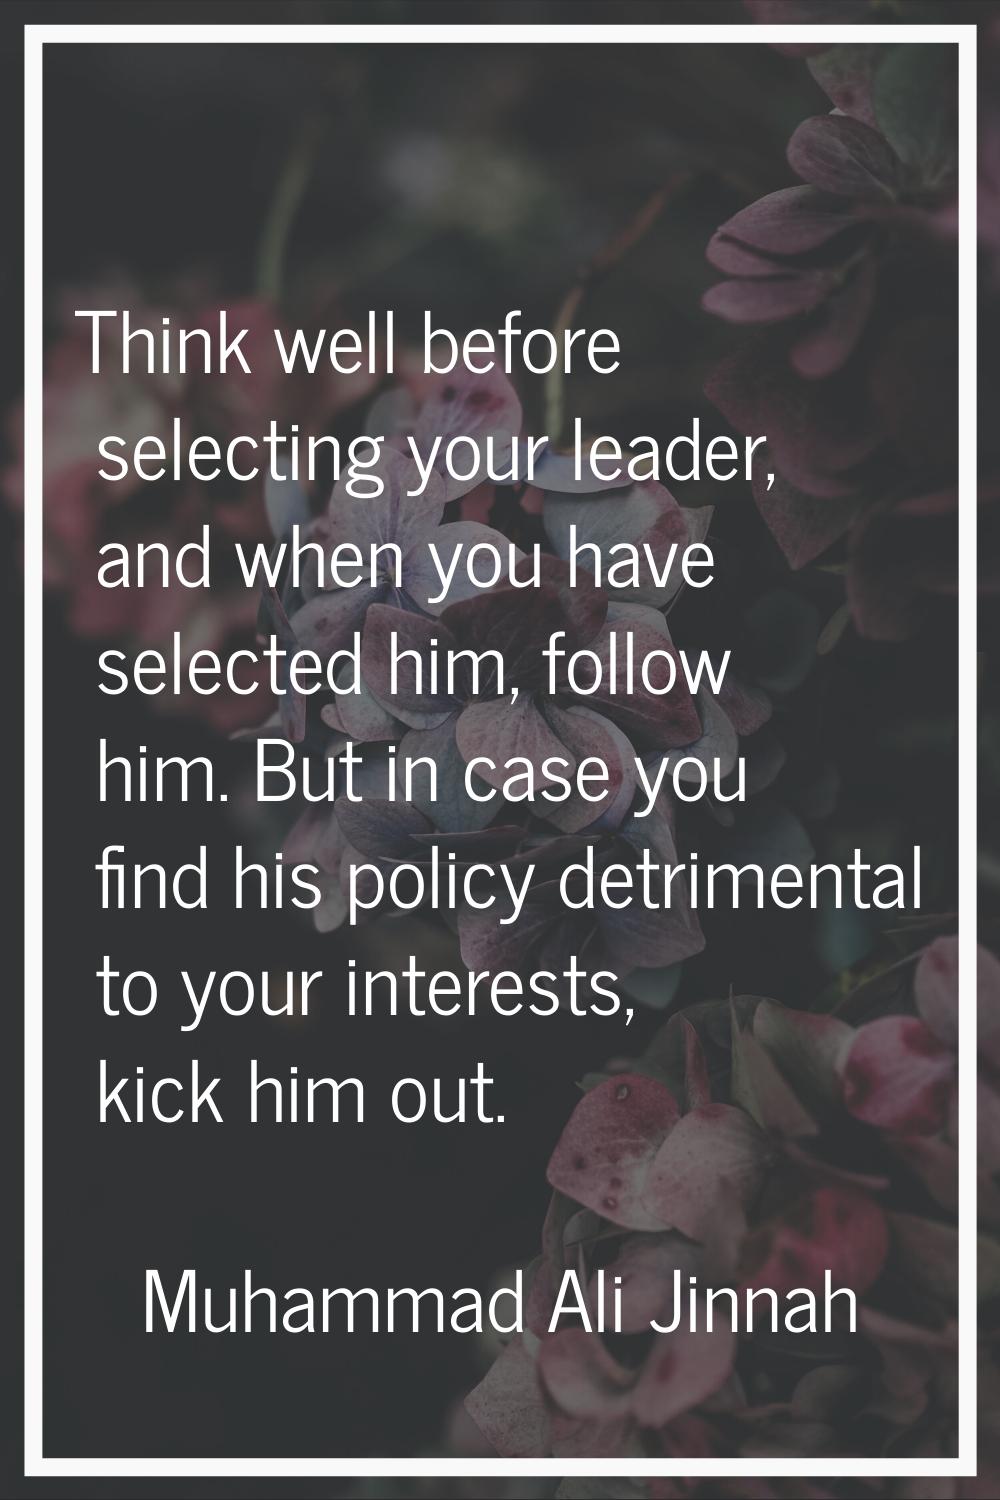 Think well before selecting your leader, and when you have selected him, follow him. But in case yo